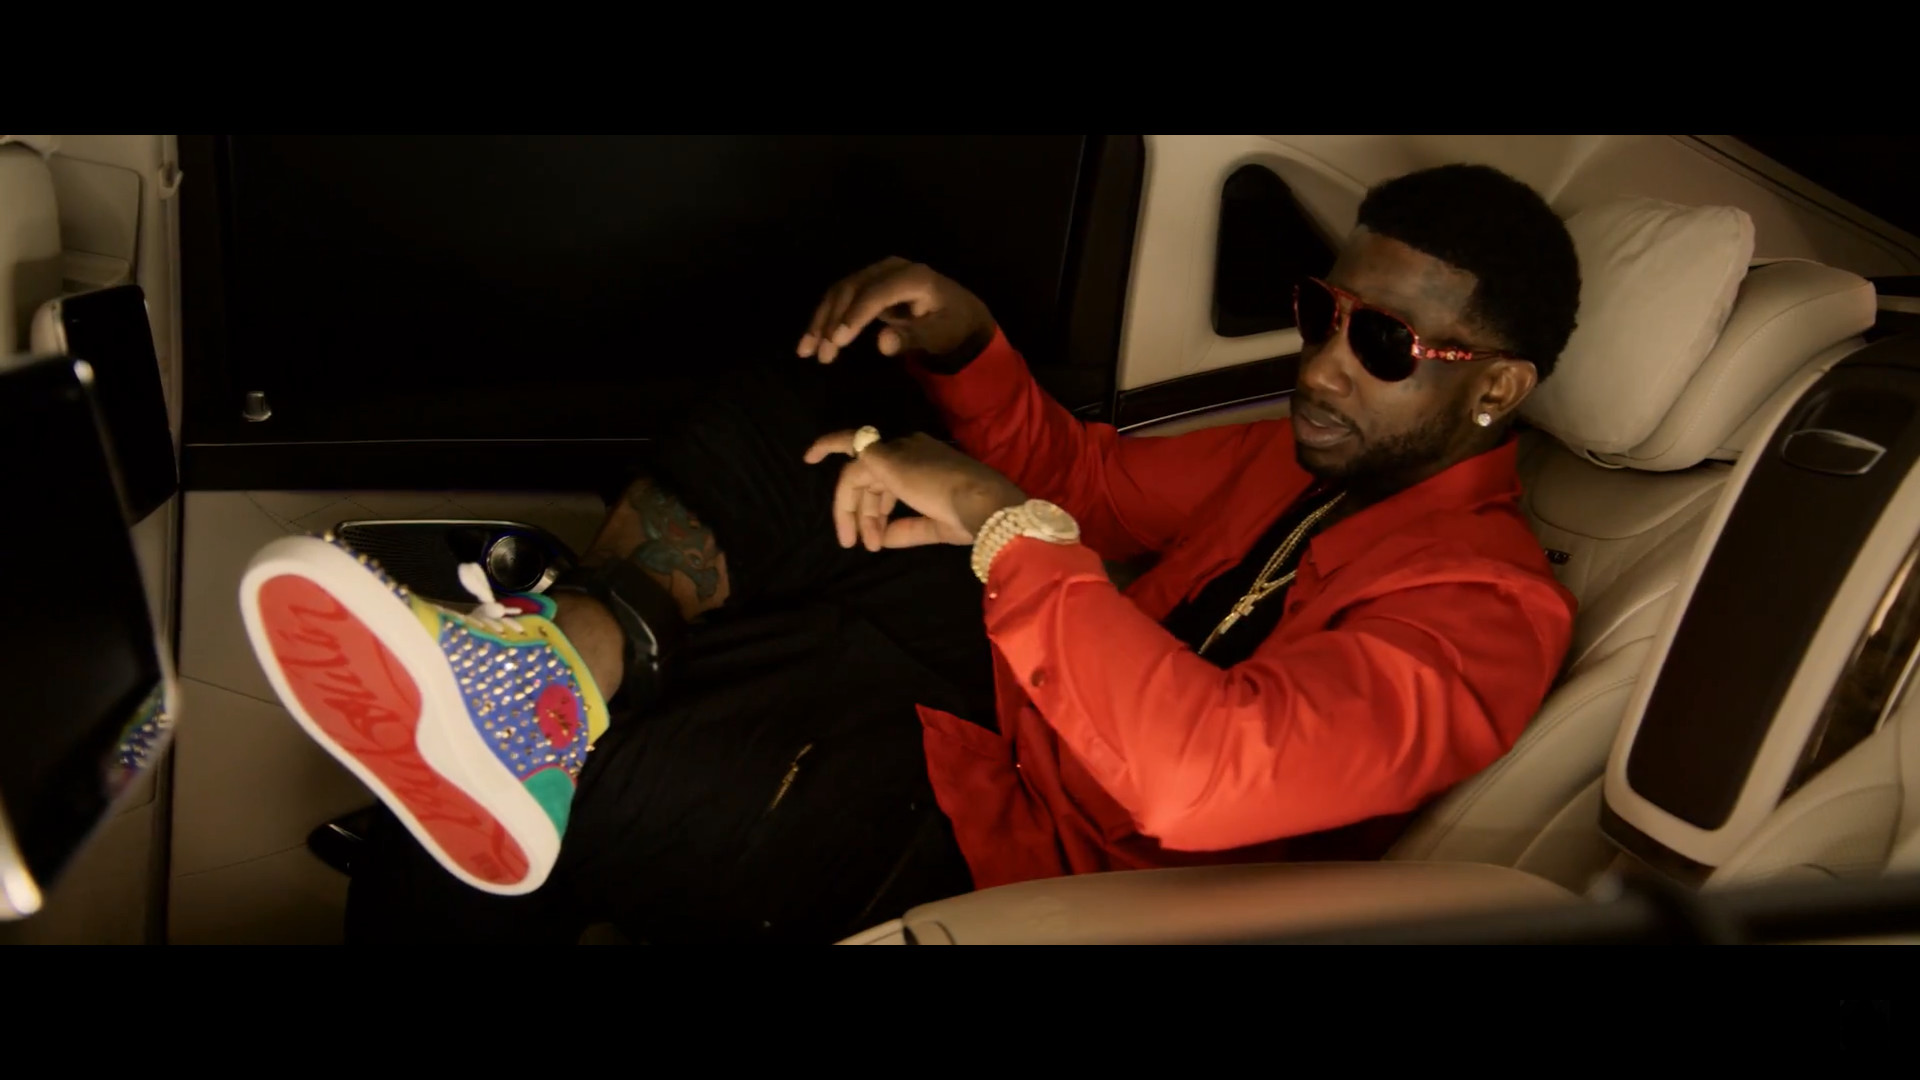 1920x1080 Gucci Mane - Waybach [Prod. By Mike Will Made It & Zaytoven] (Music Video)  | DatWAV.com